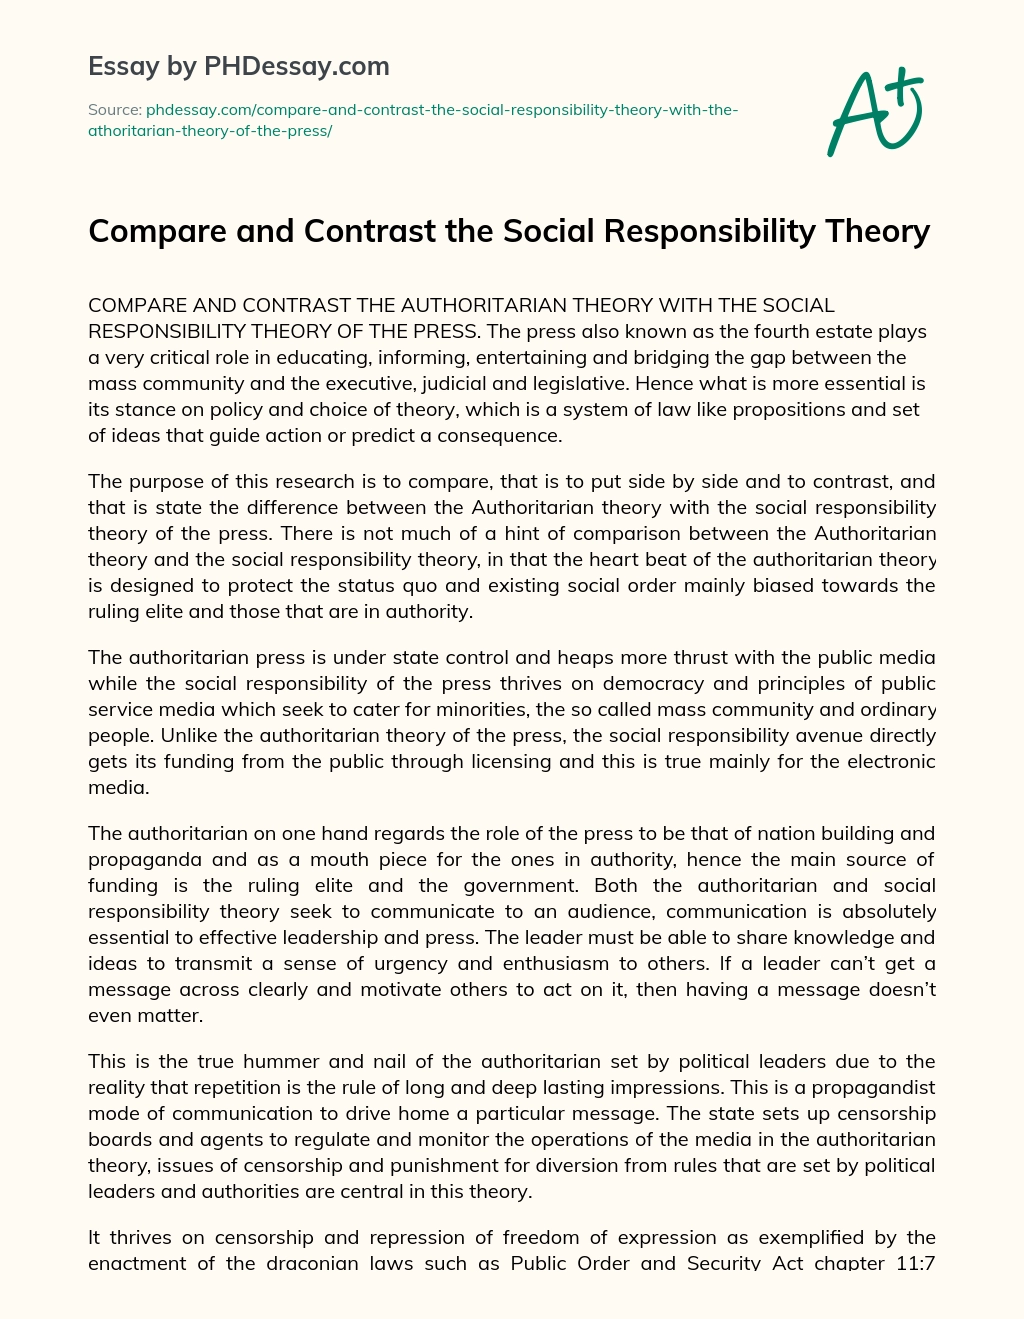 Compare and Contrast the Social Responsibility Theory essay